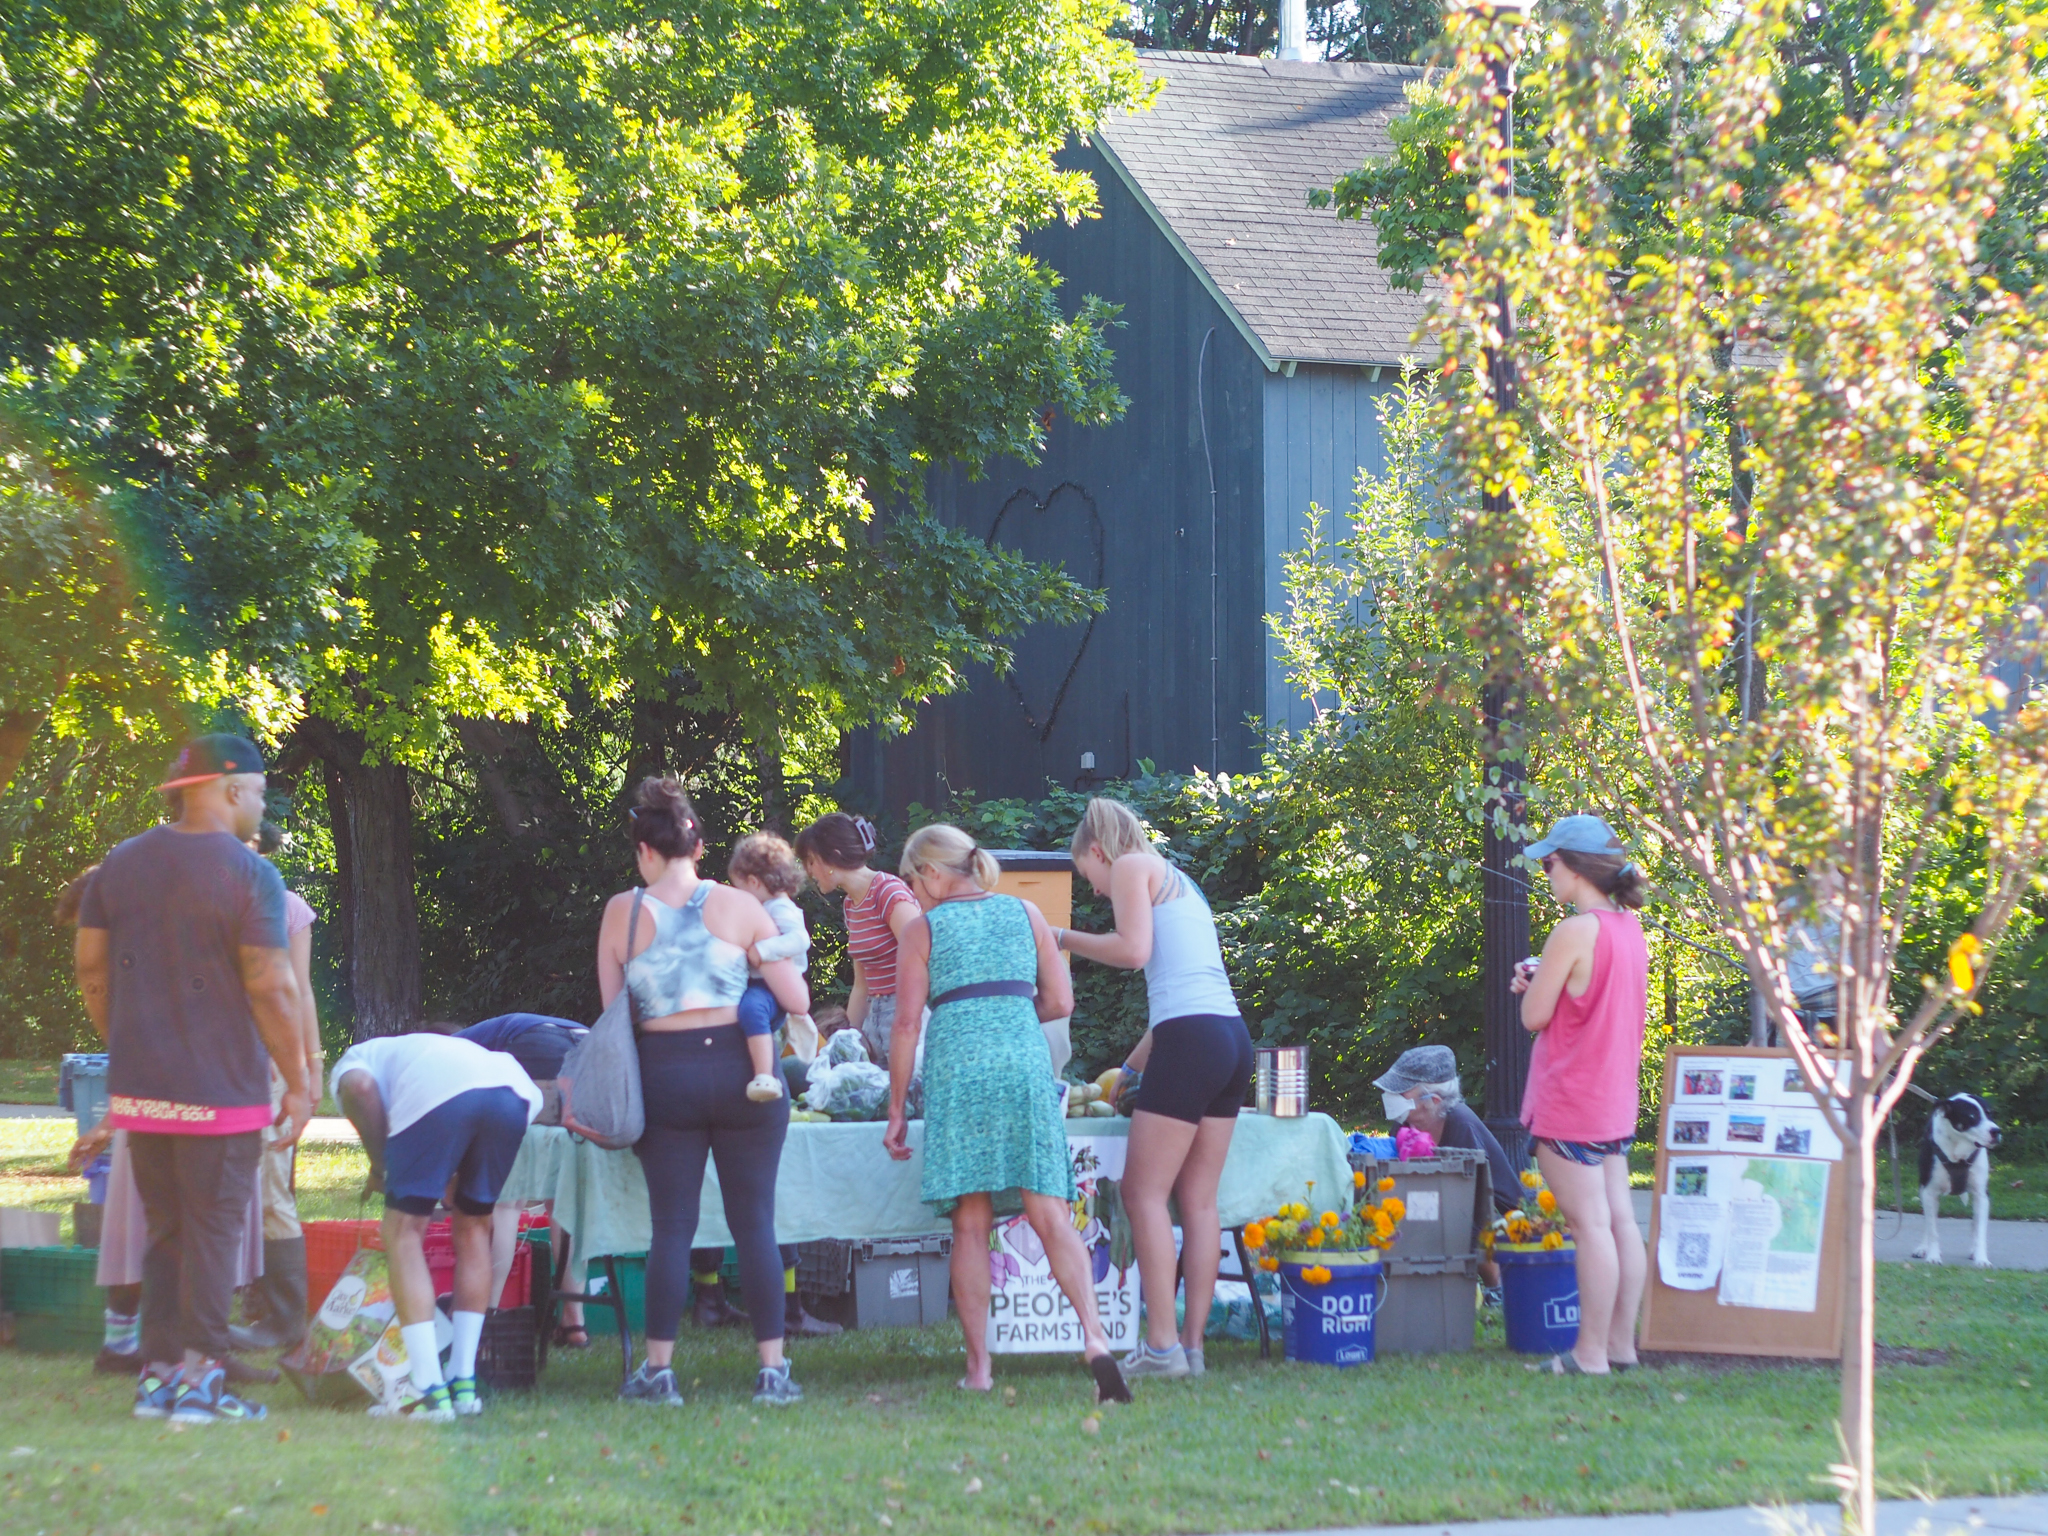 Community members gather around The People's Farmstand in Pomeroy Park in Burlington, VT